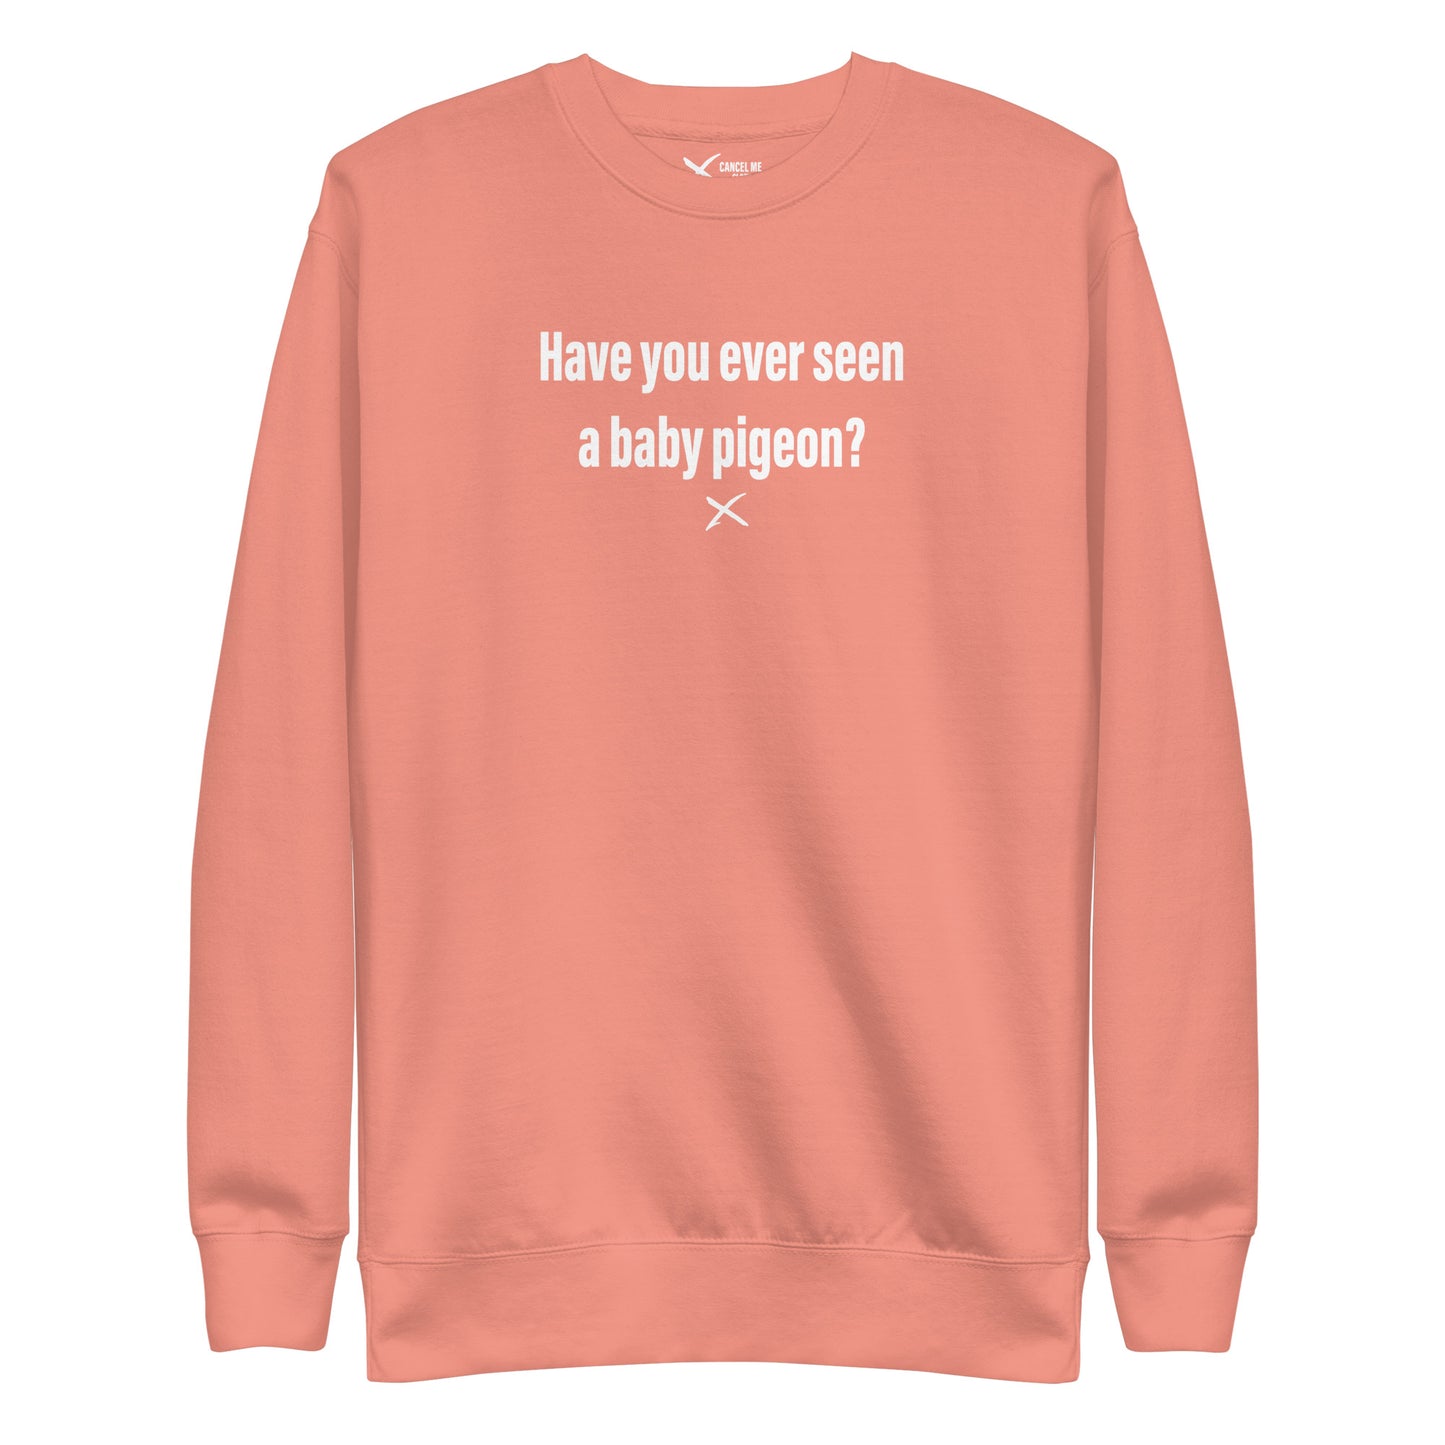 Have you ever seen a baby pigeon? - Sweatshirt